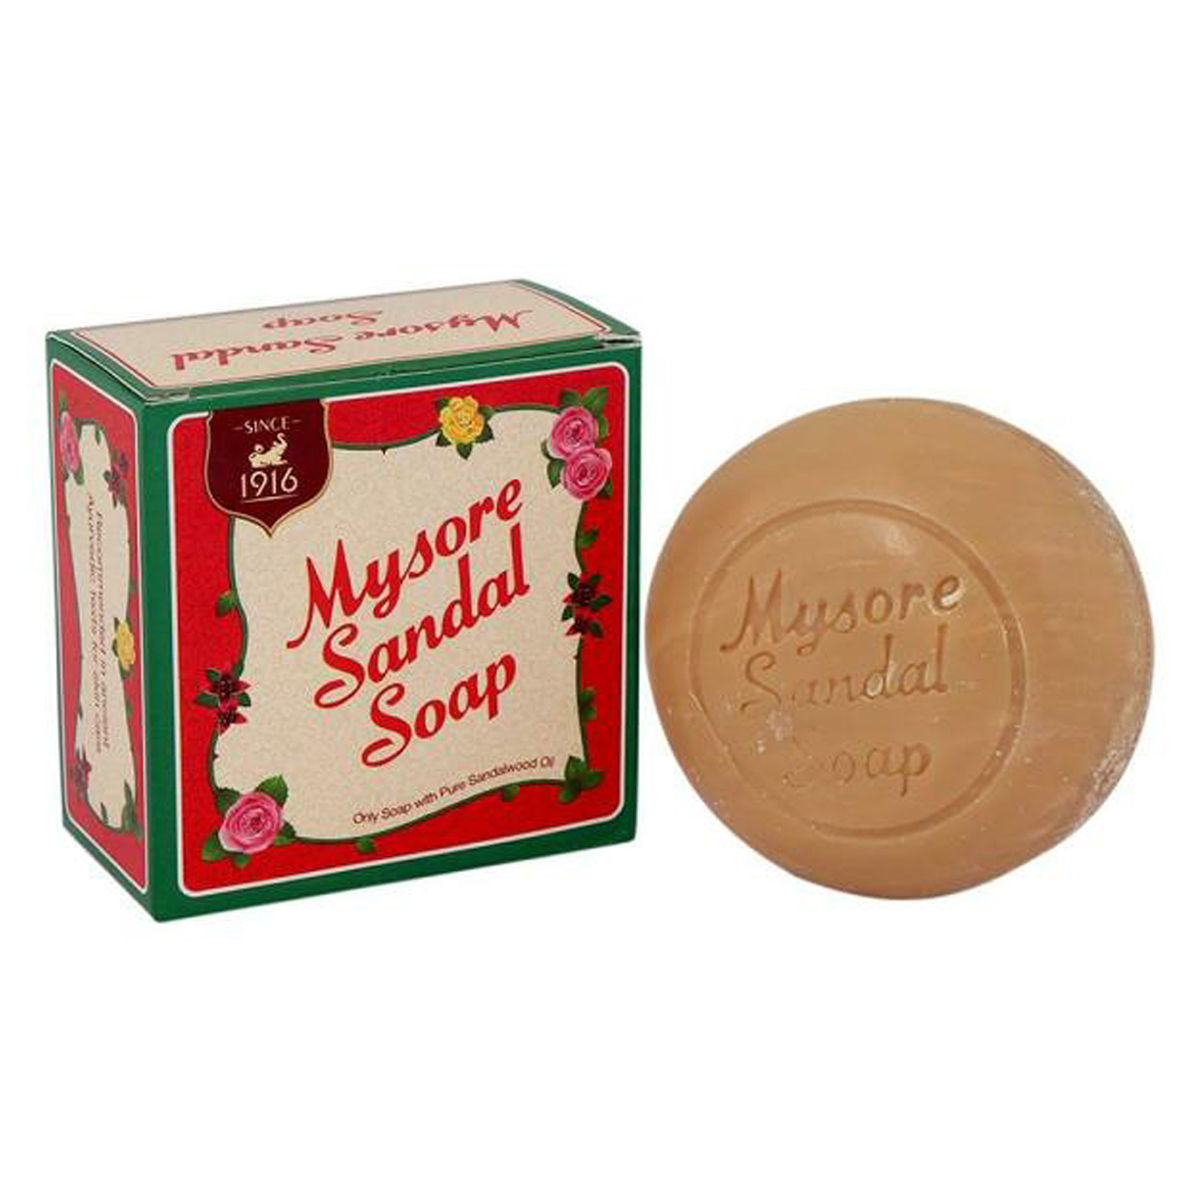 What are the benefits of using Mysore Sandal Soap? - Quora